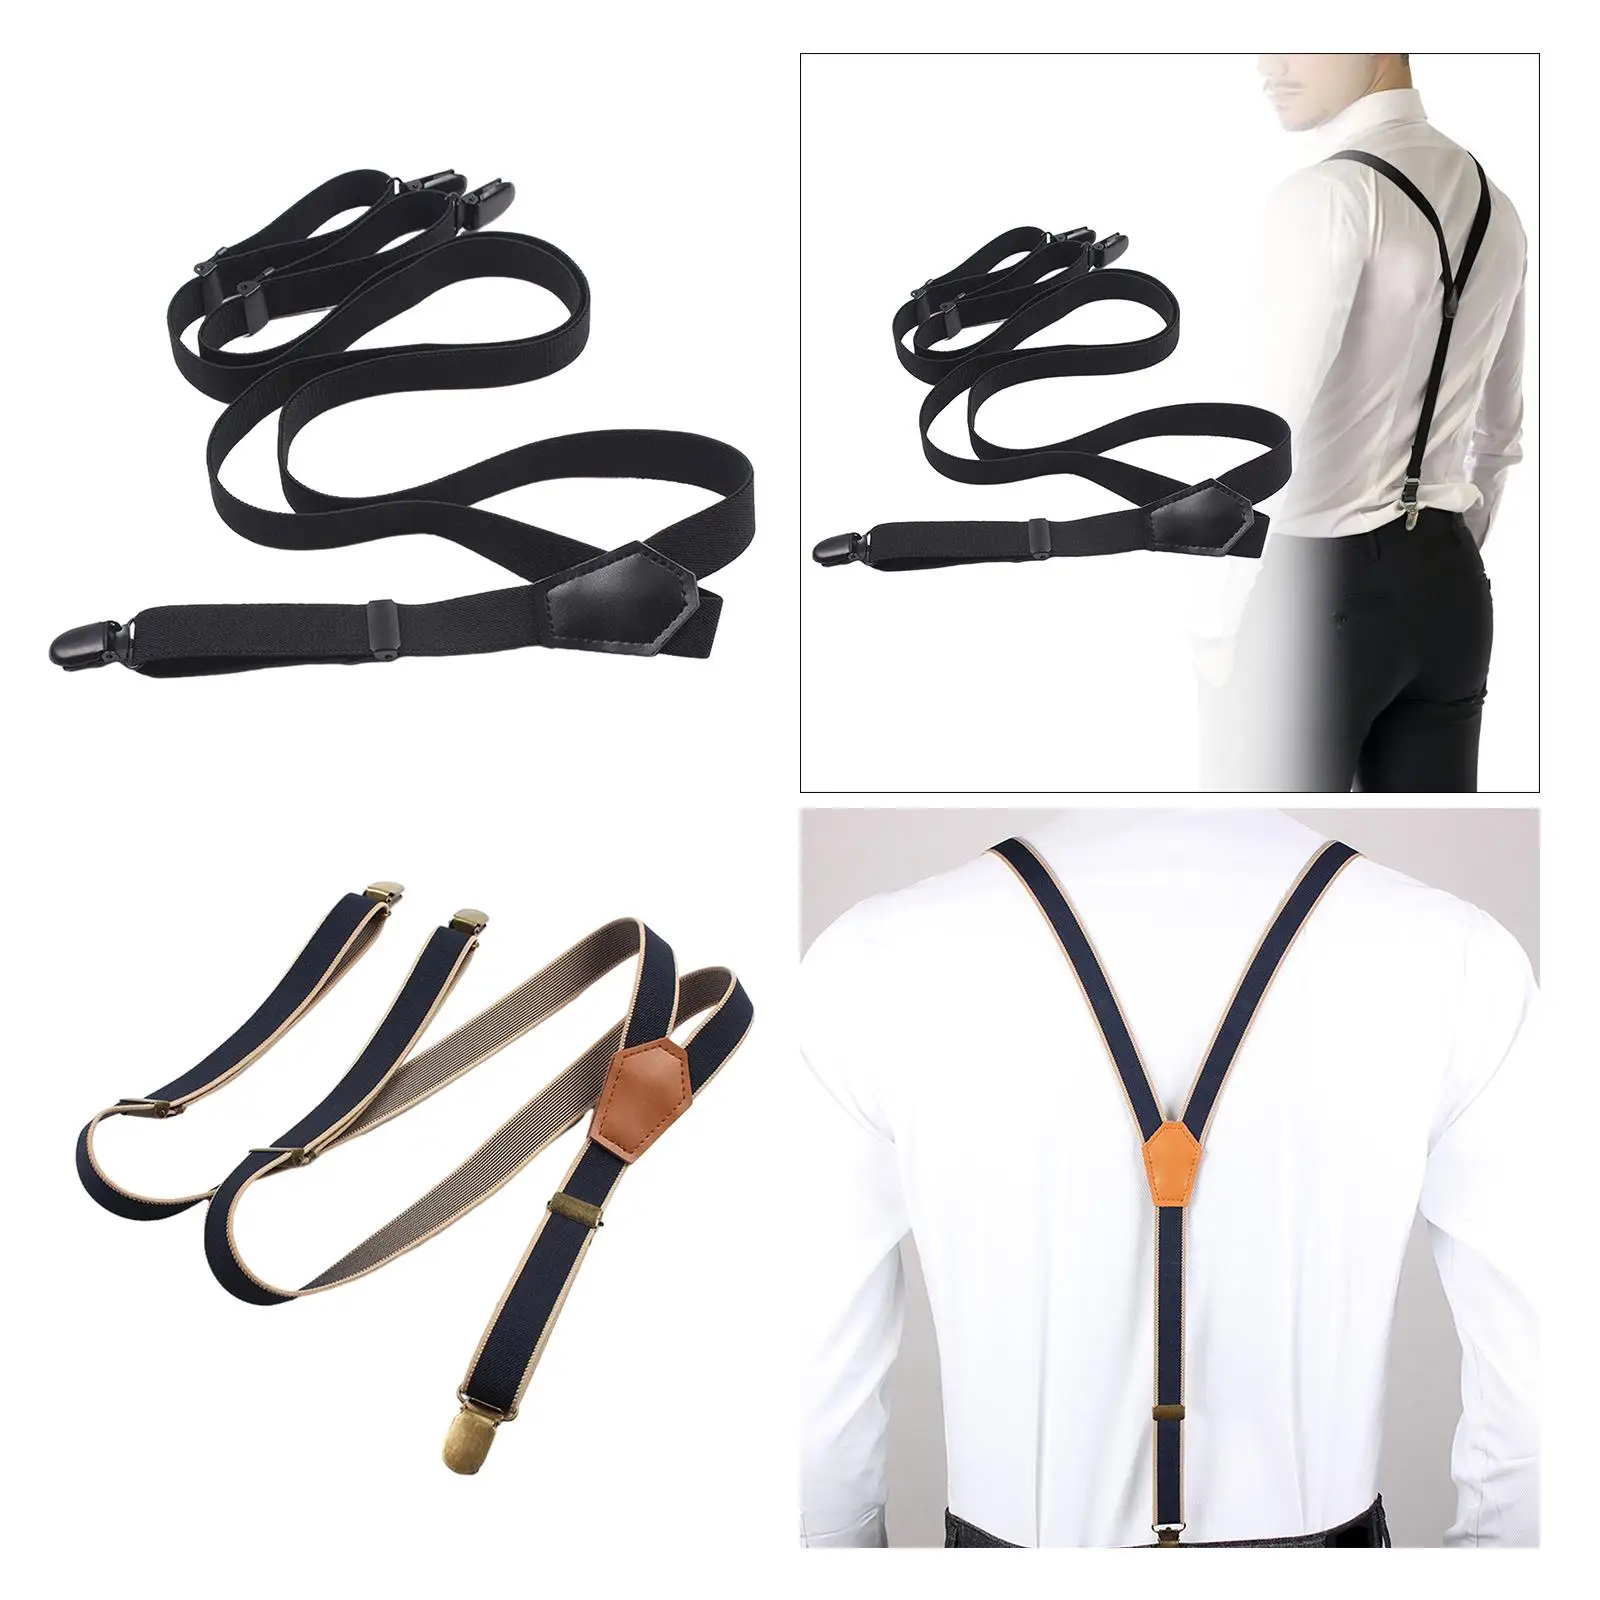 Men`s Suspenders Leather Strap Fashion Adjustable Belt Trousers Braces for Business Wedding Formal Events Father/husband`s Gift